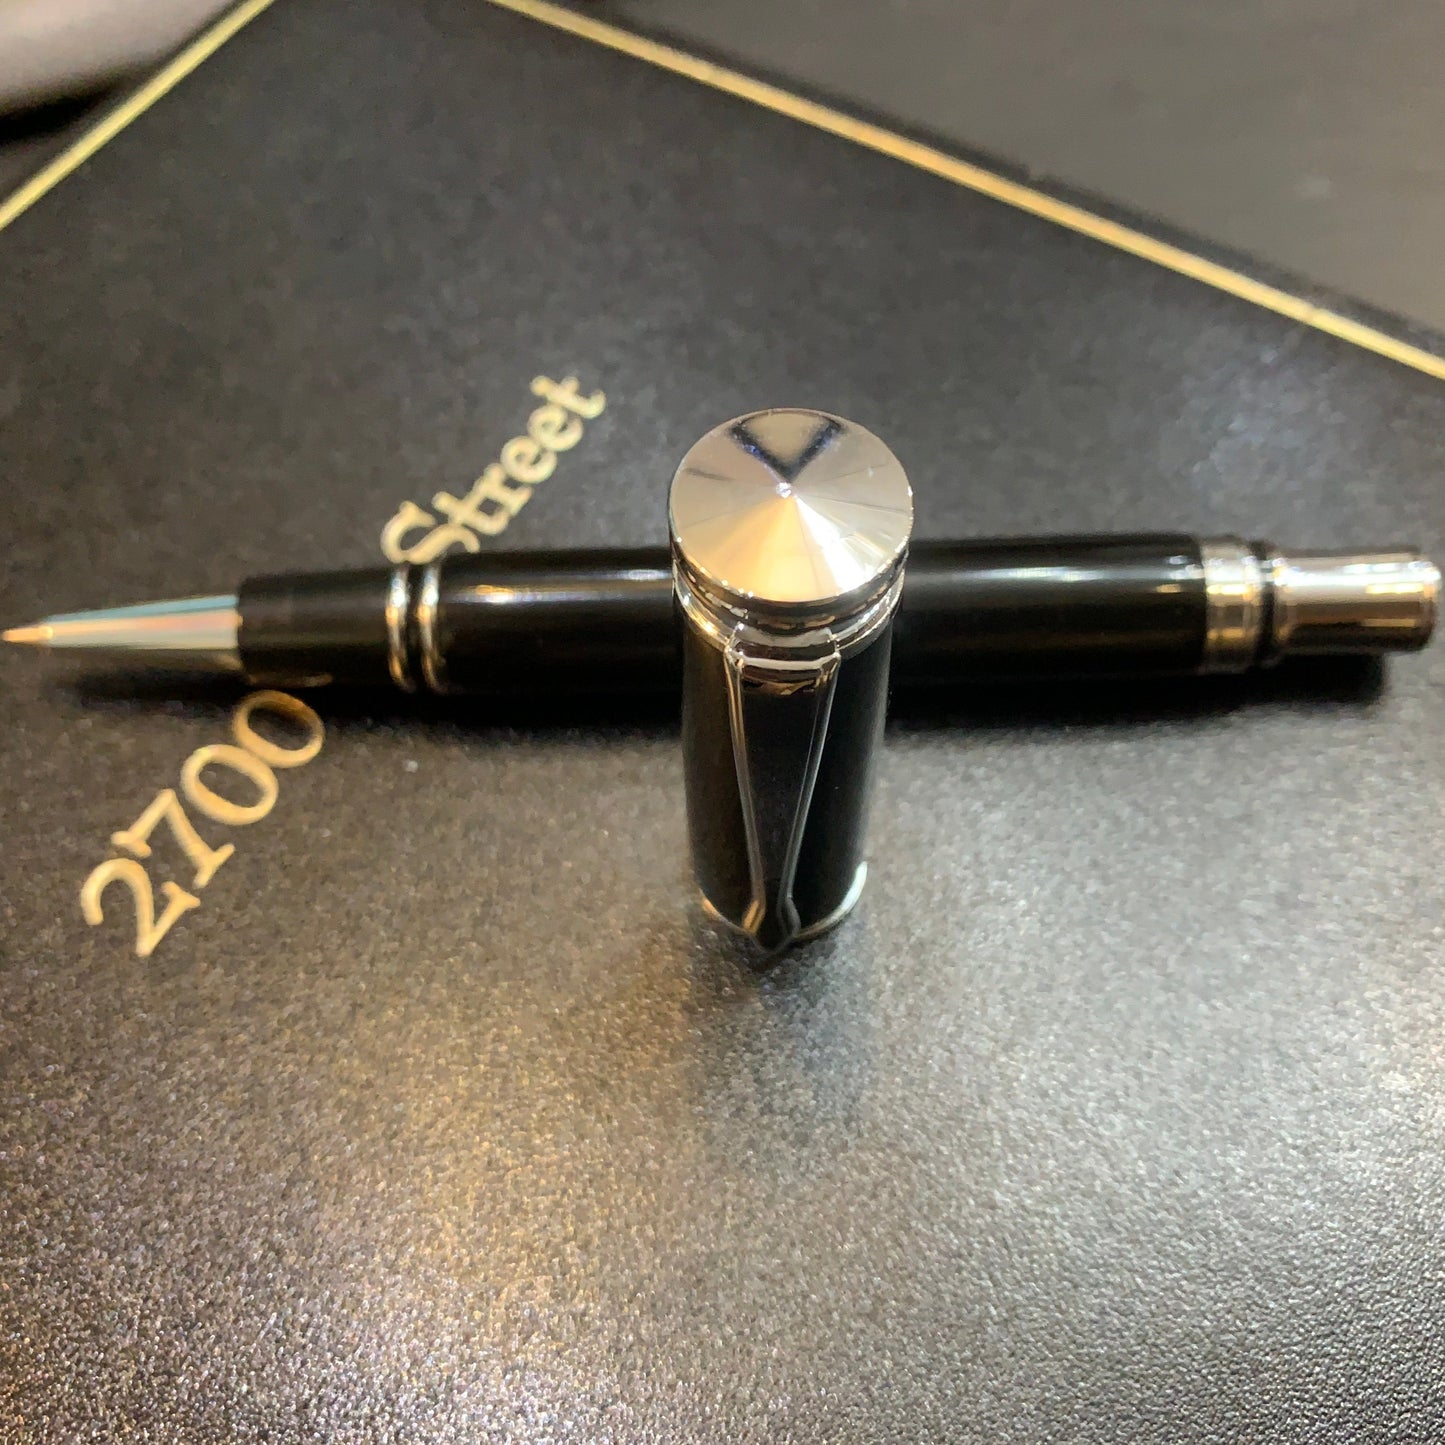 Bespoke Luxury Pens | EXECUTIVE Roller Pen | Presented in BLACK LACQUER BOX | Custom Colour with Nickel or Gold Custom Writing Instruments | Charing Cross Ltd